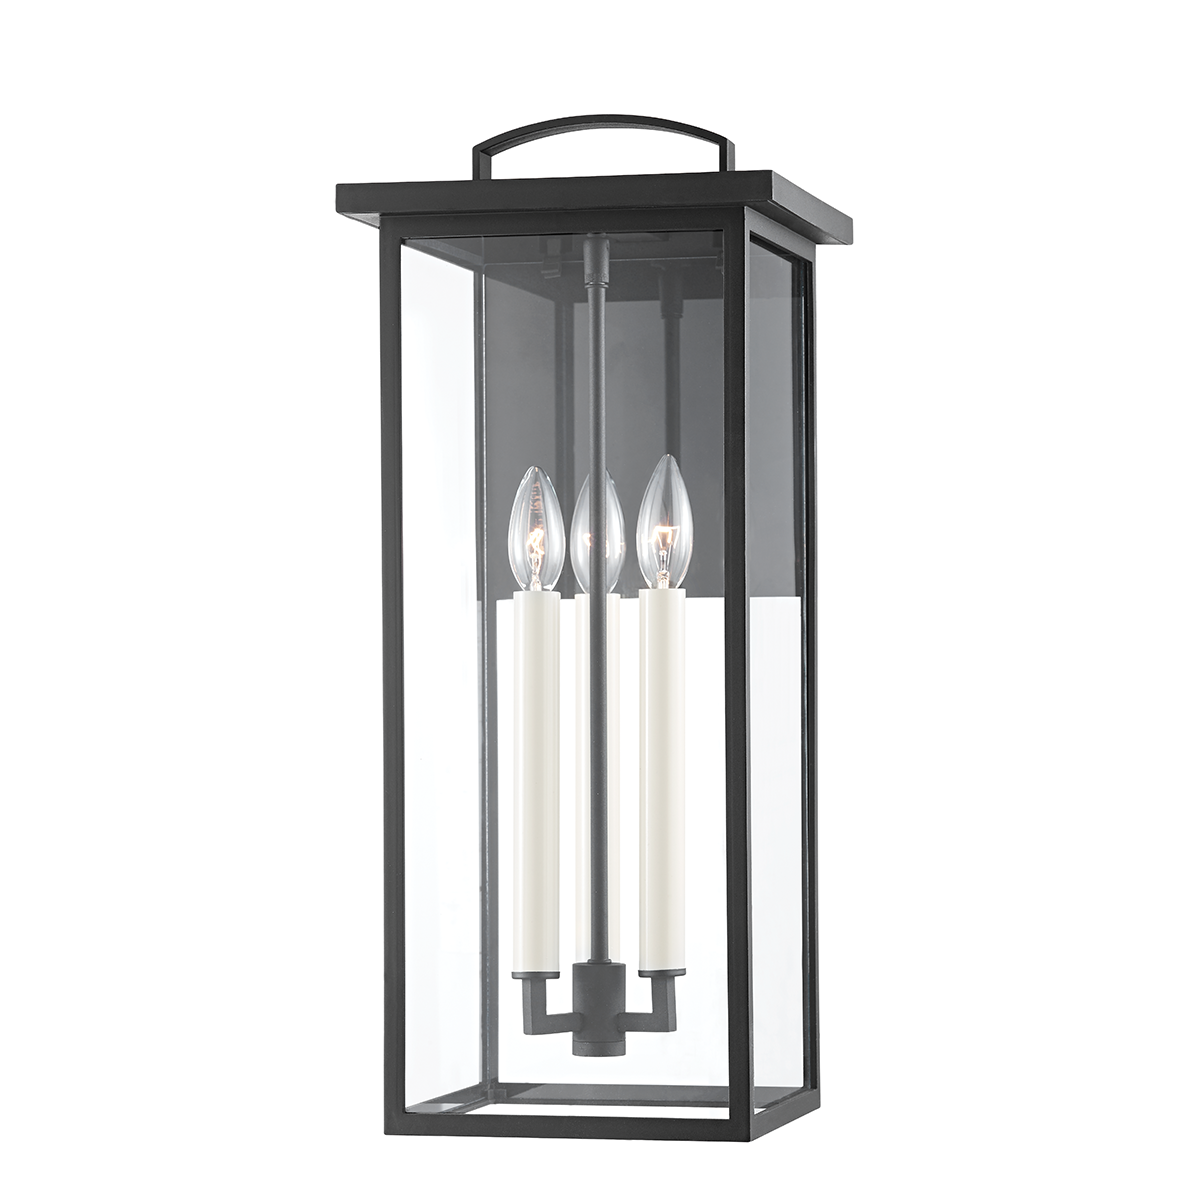 Troy EDEN 3 LIGHT LARGE EXTERIOR WALL SCONCE B7523 Outdoor l Wall Troy Lighting TEXTURE BLACK  